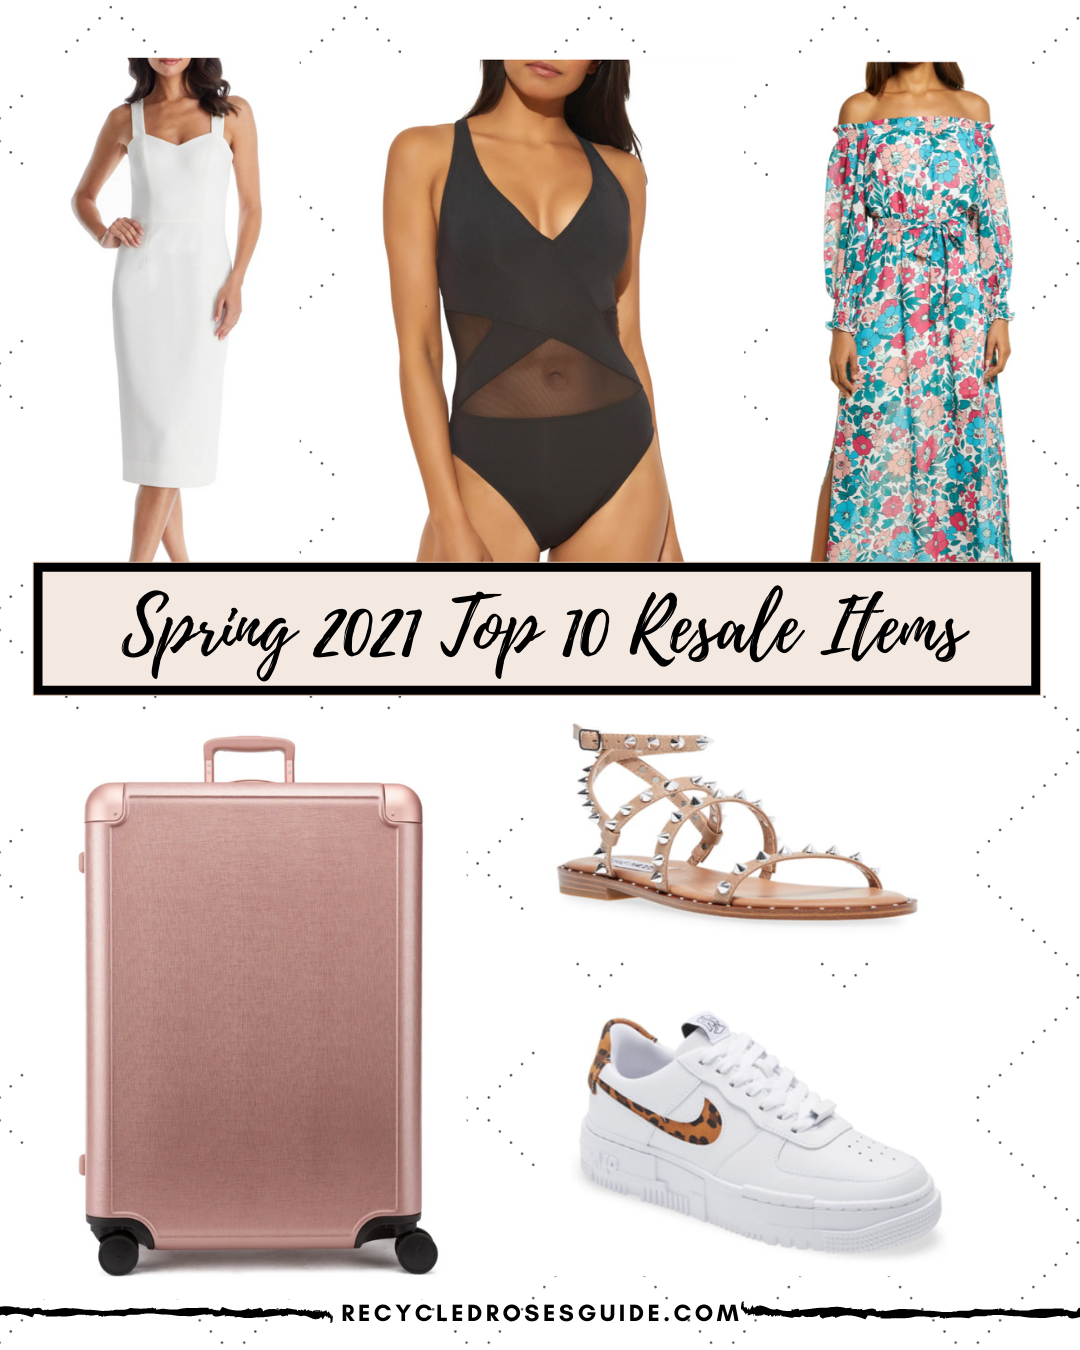 Top 10 Items to Source in Spring 2021 for Resale